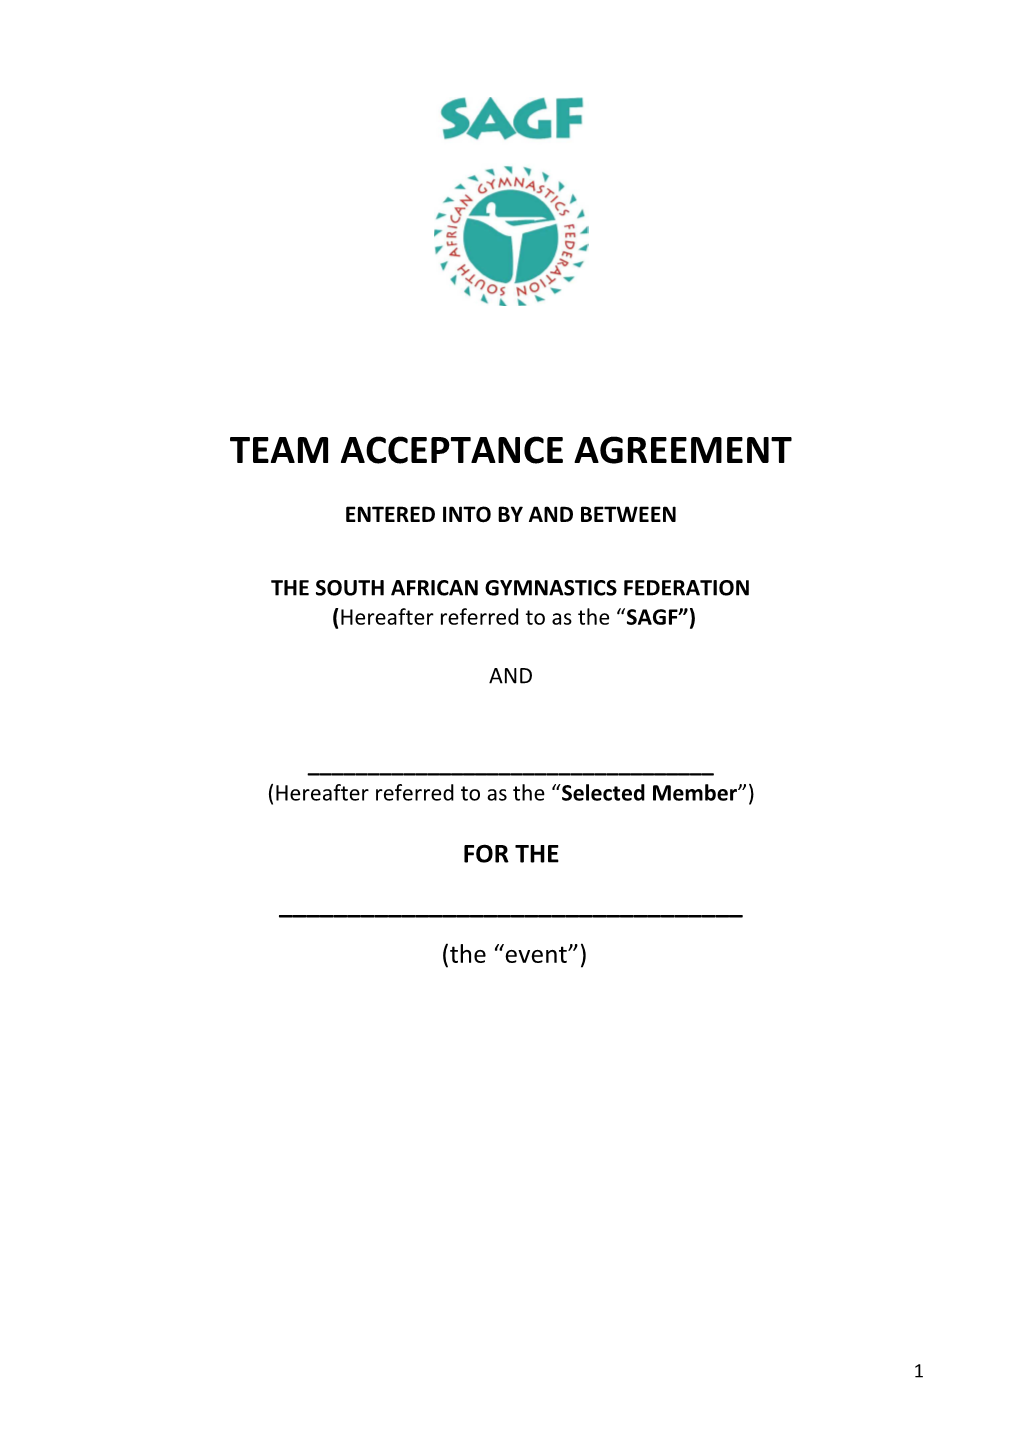 Entry Agreement Between Acrobatic Gymnastics Programme Management and Intended Participants